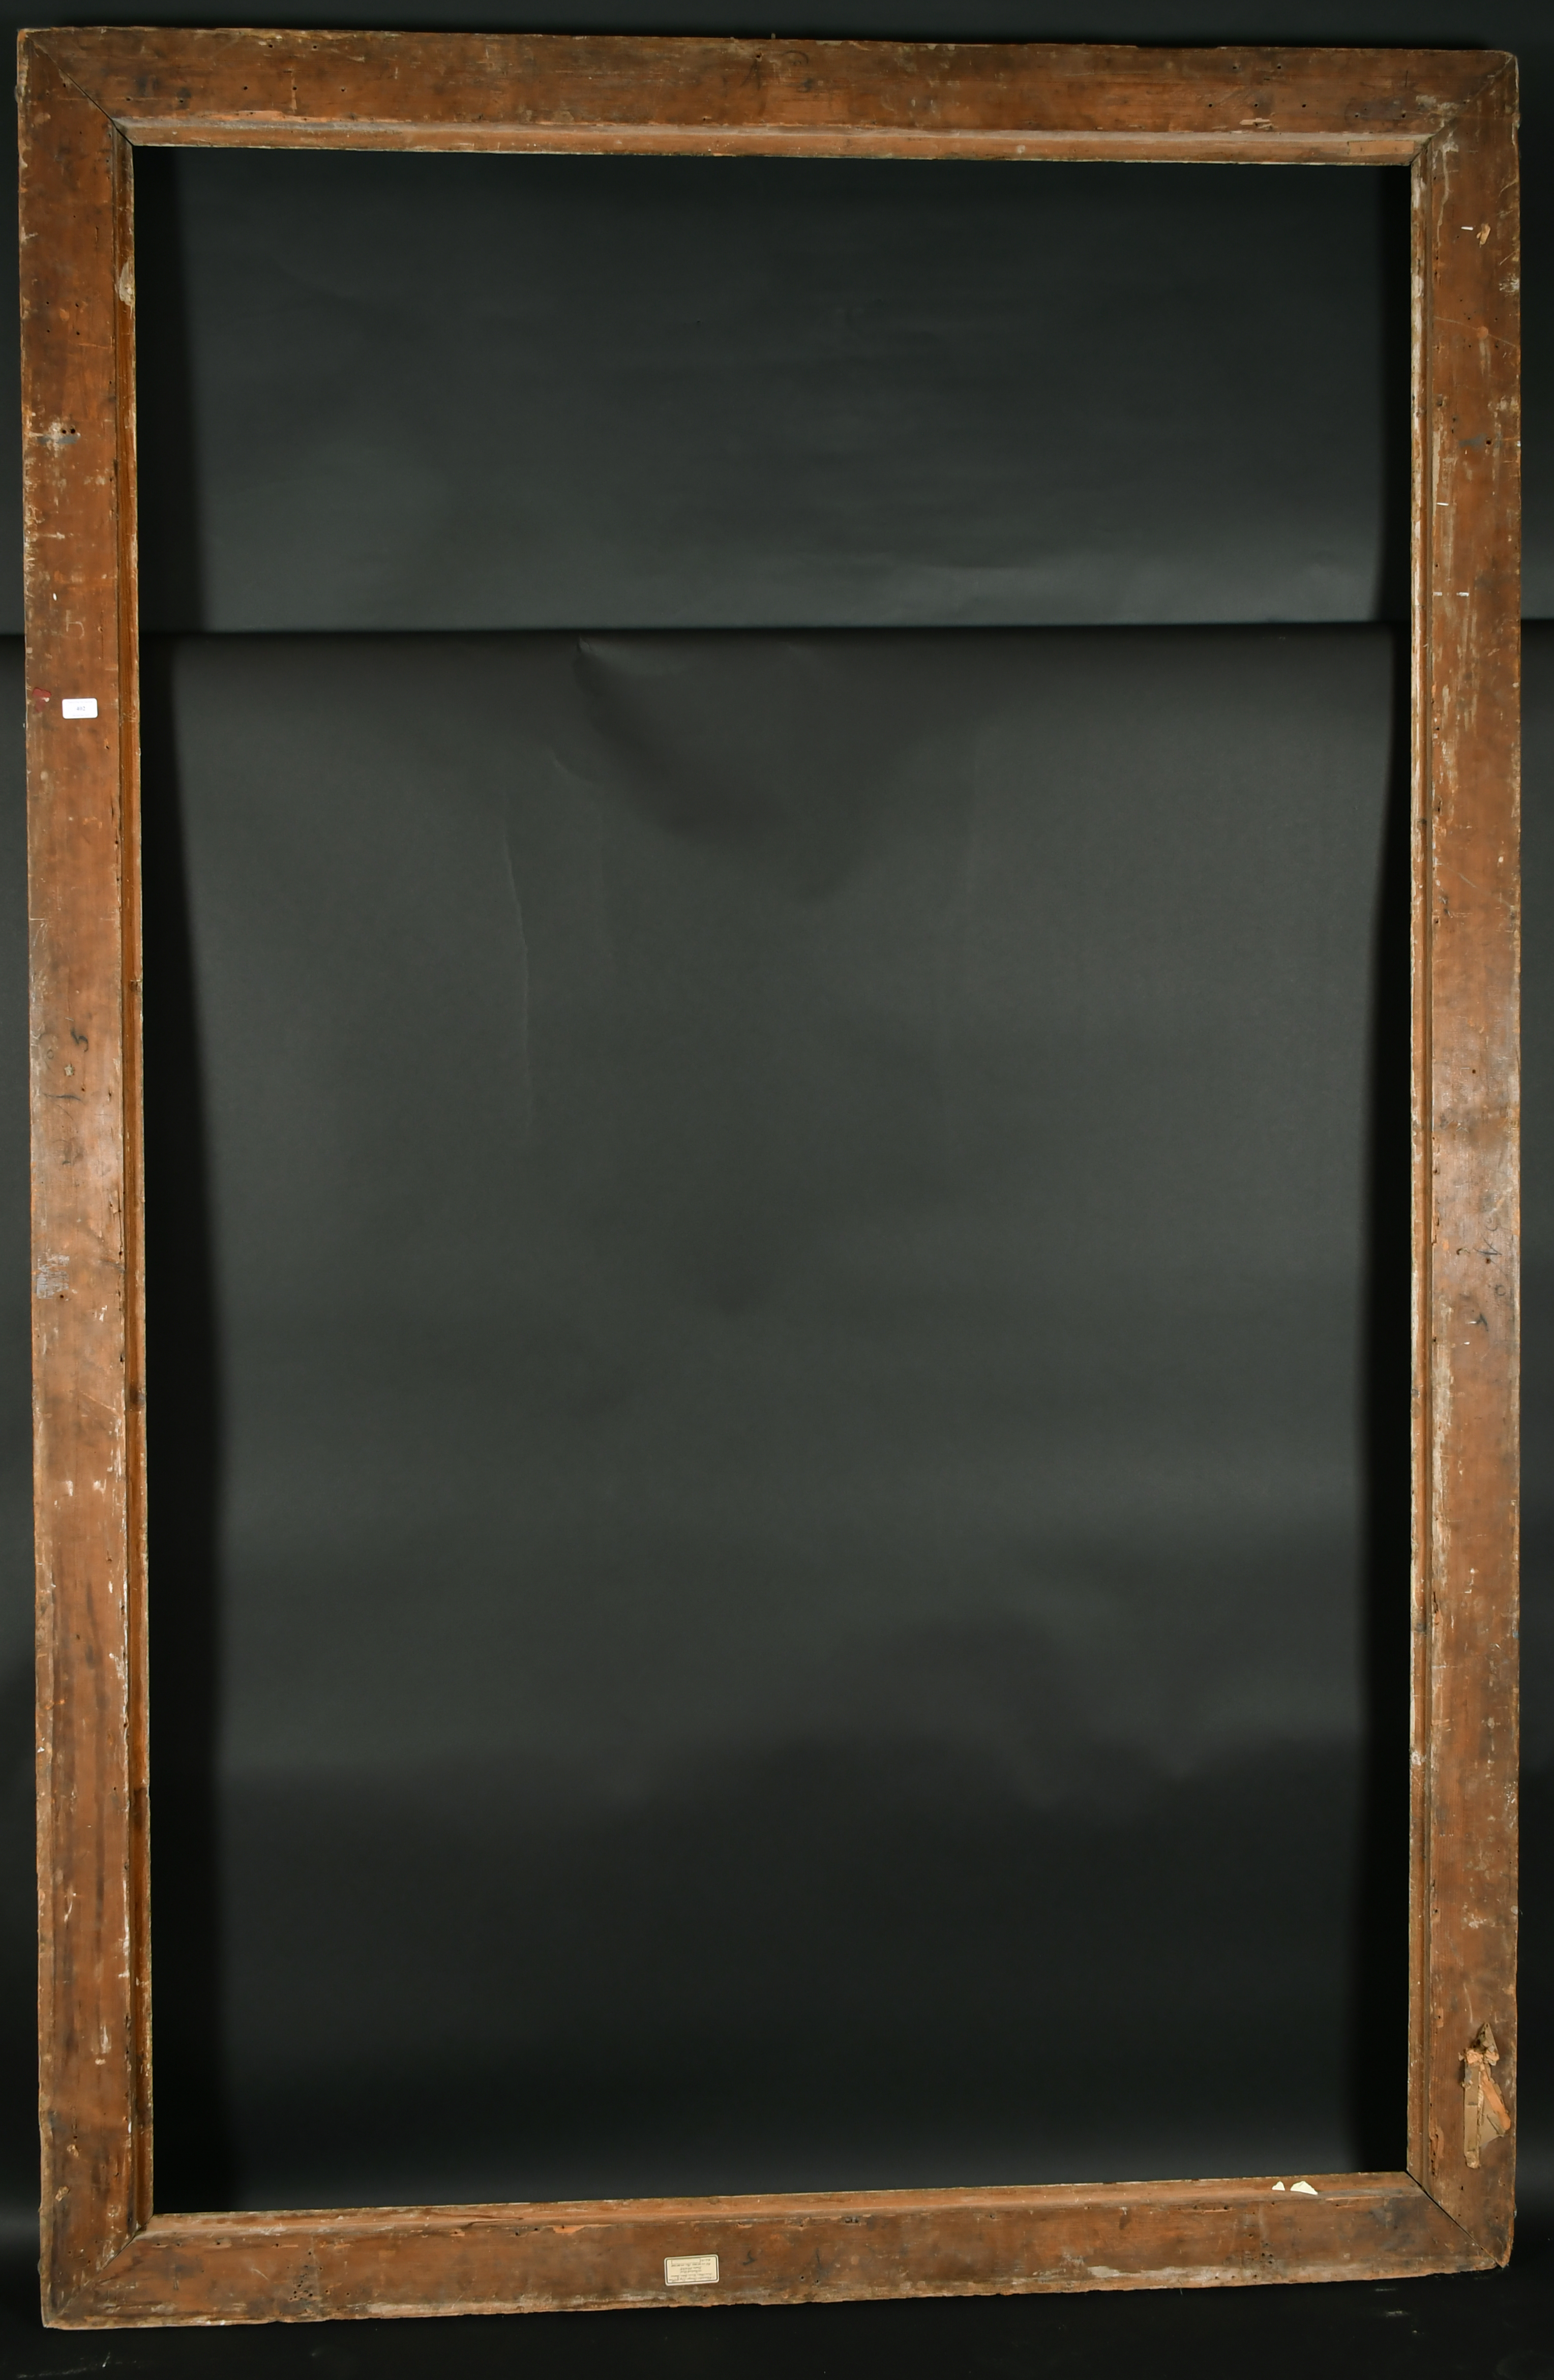 17th Century English School. A Rare and Important Charles II Carved Silverwood Panel Frame, circa - Image 4 of 4